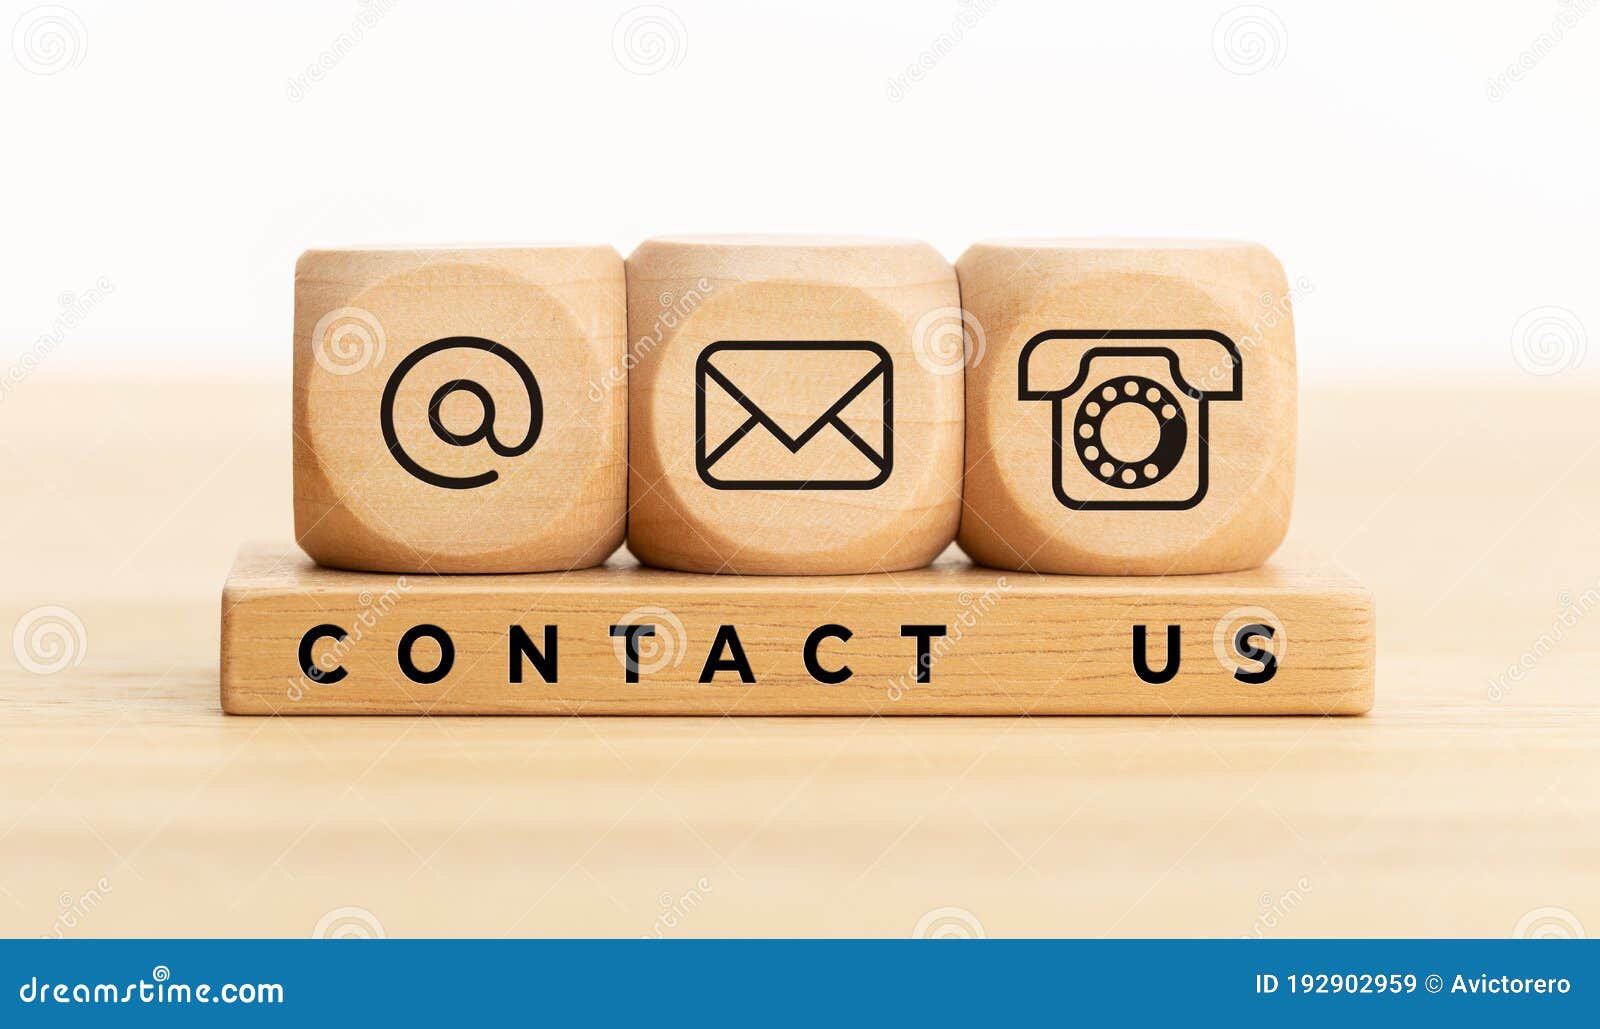 website page contact us or e-mail marketing